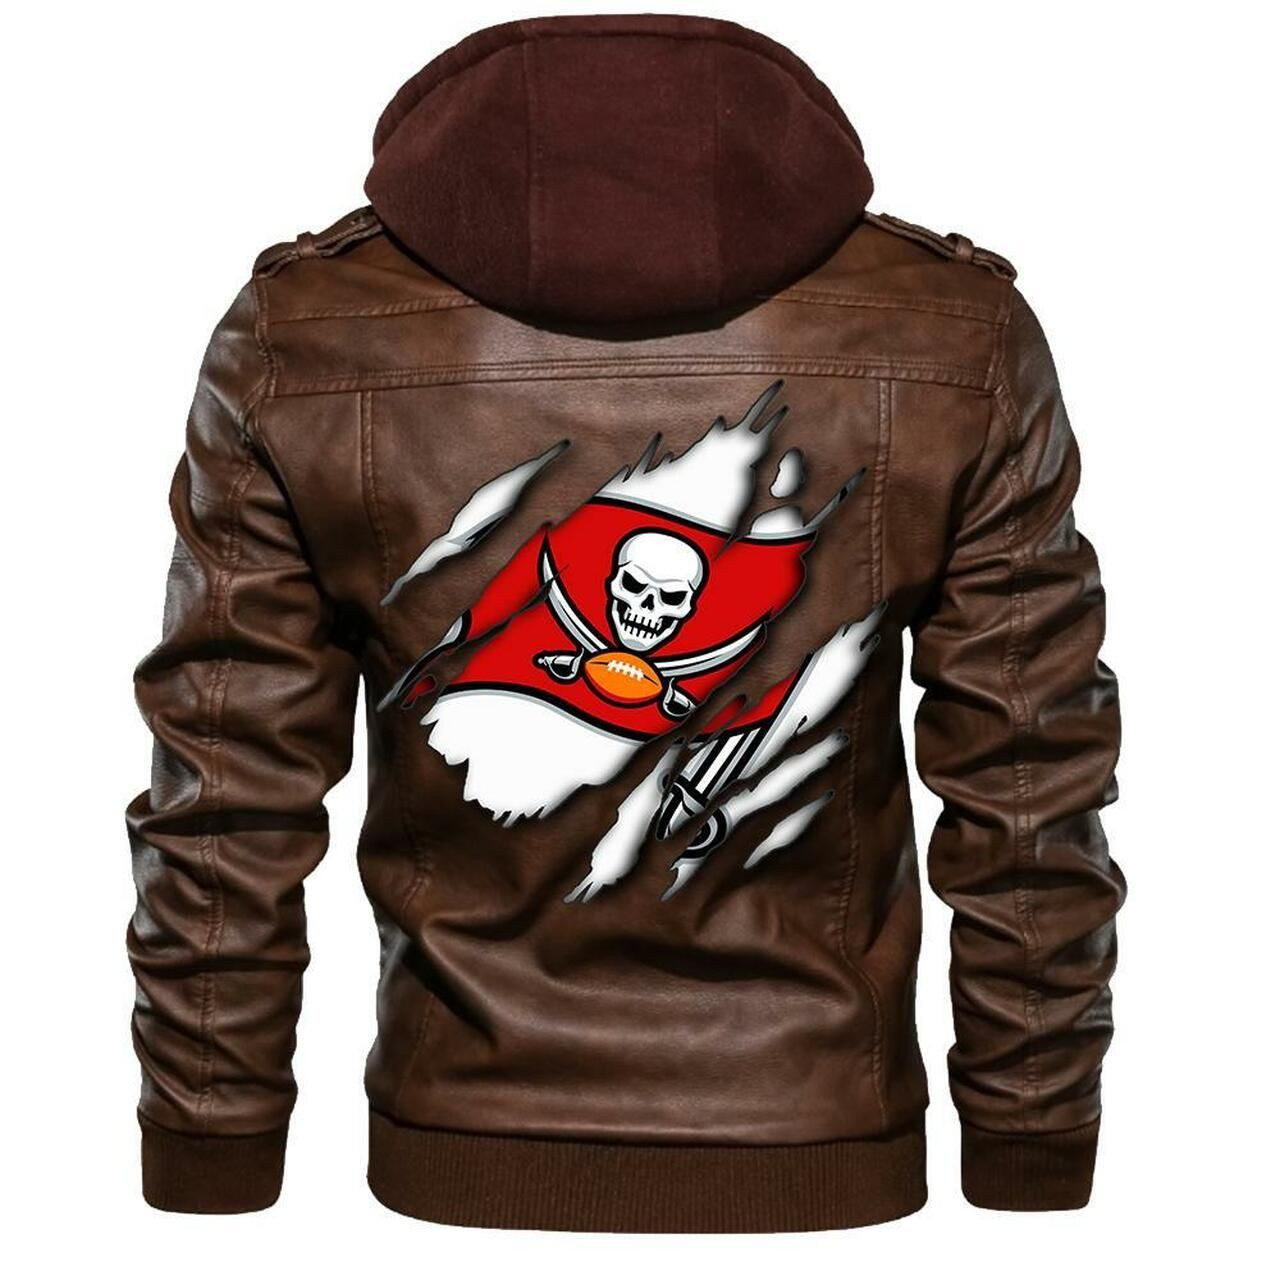 These Amazing Leather Jacket will add to the appeal of your outfit 123